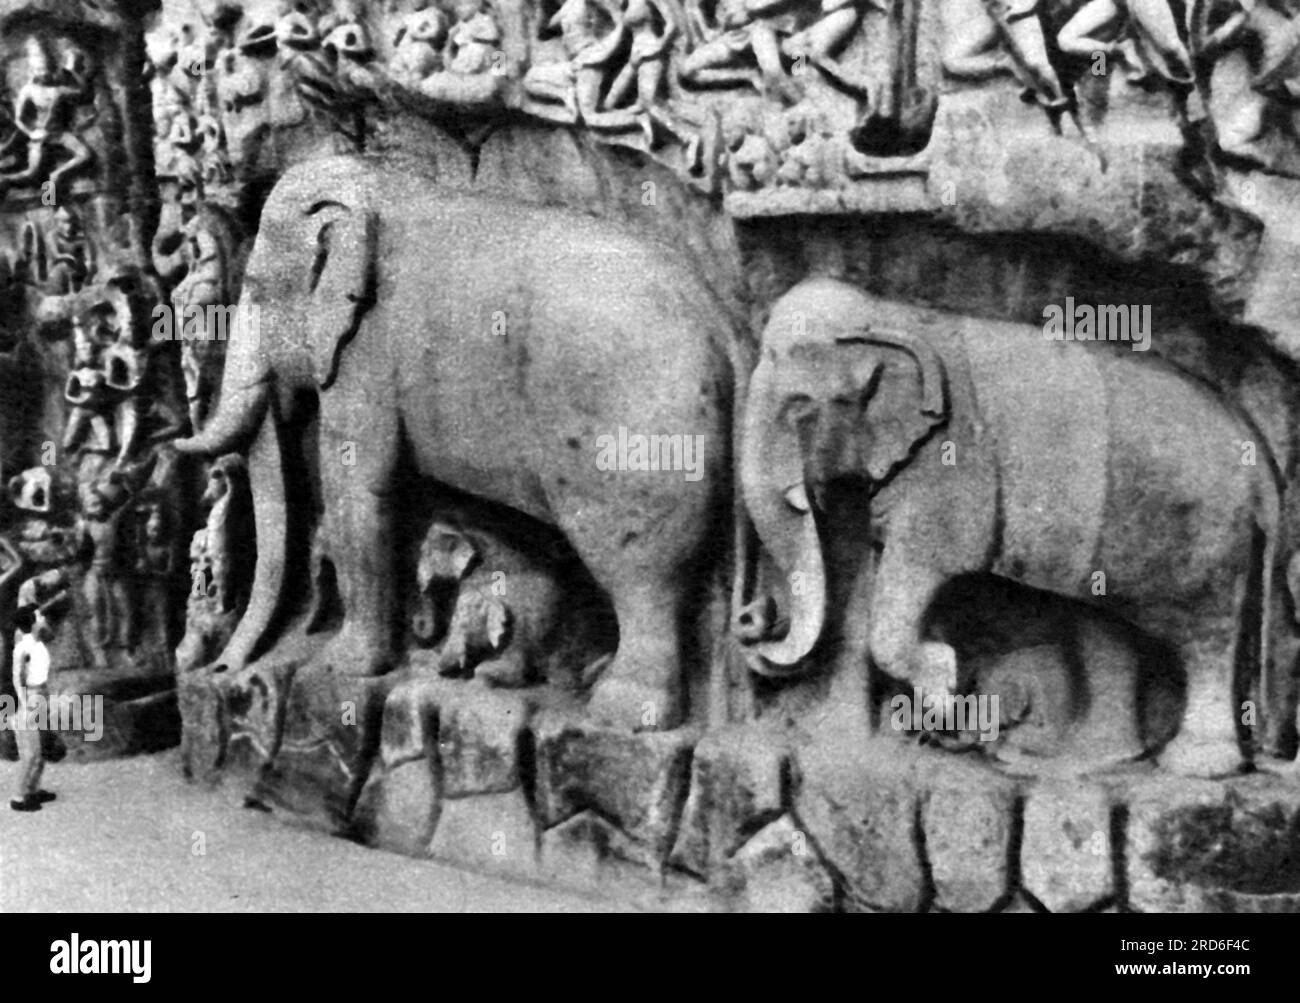 zoology / animals, proboscidean, elephant, Indian elephant (Elphas maximus indicus), stone carving, ADDITIONAL-RIGHTS-CLEARANCE-INFO-NOT-AVAILABLE Stock Photo